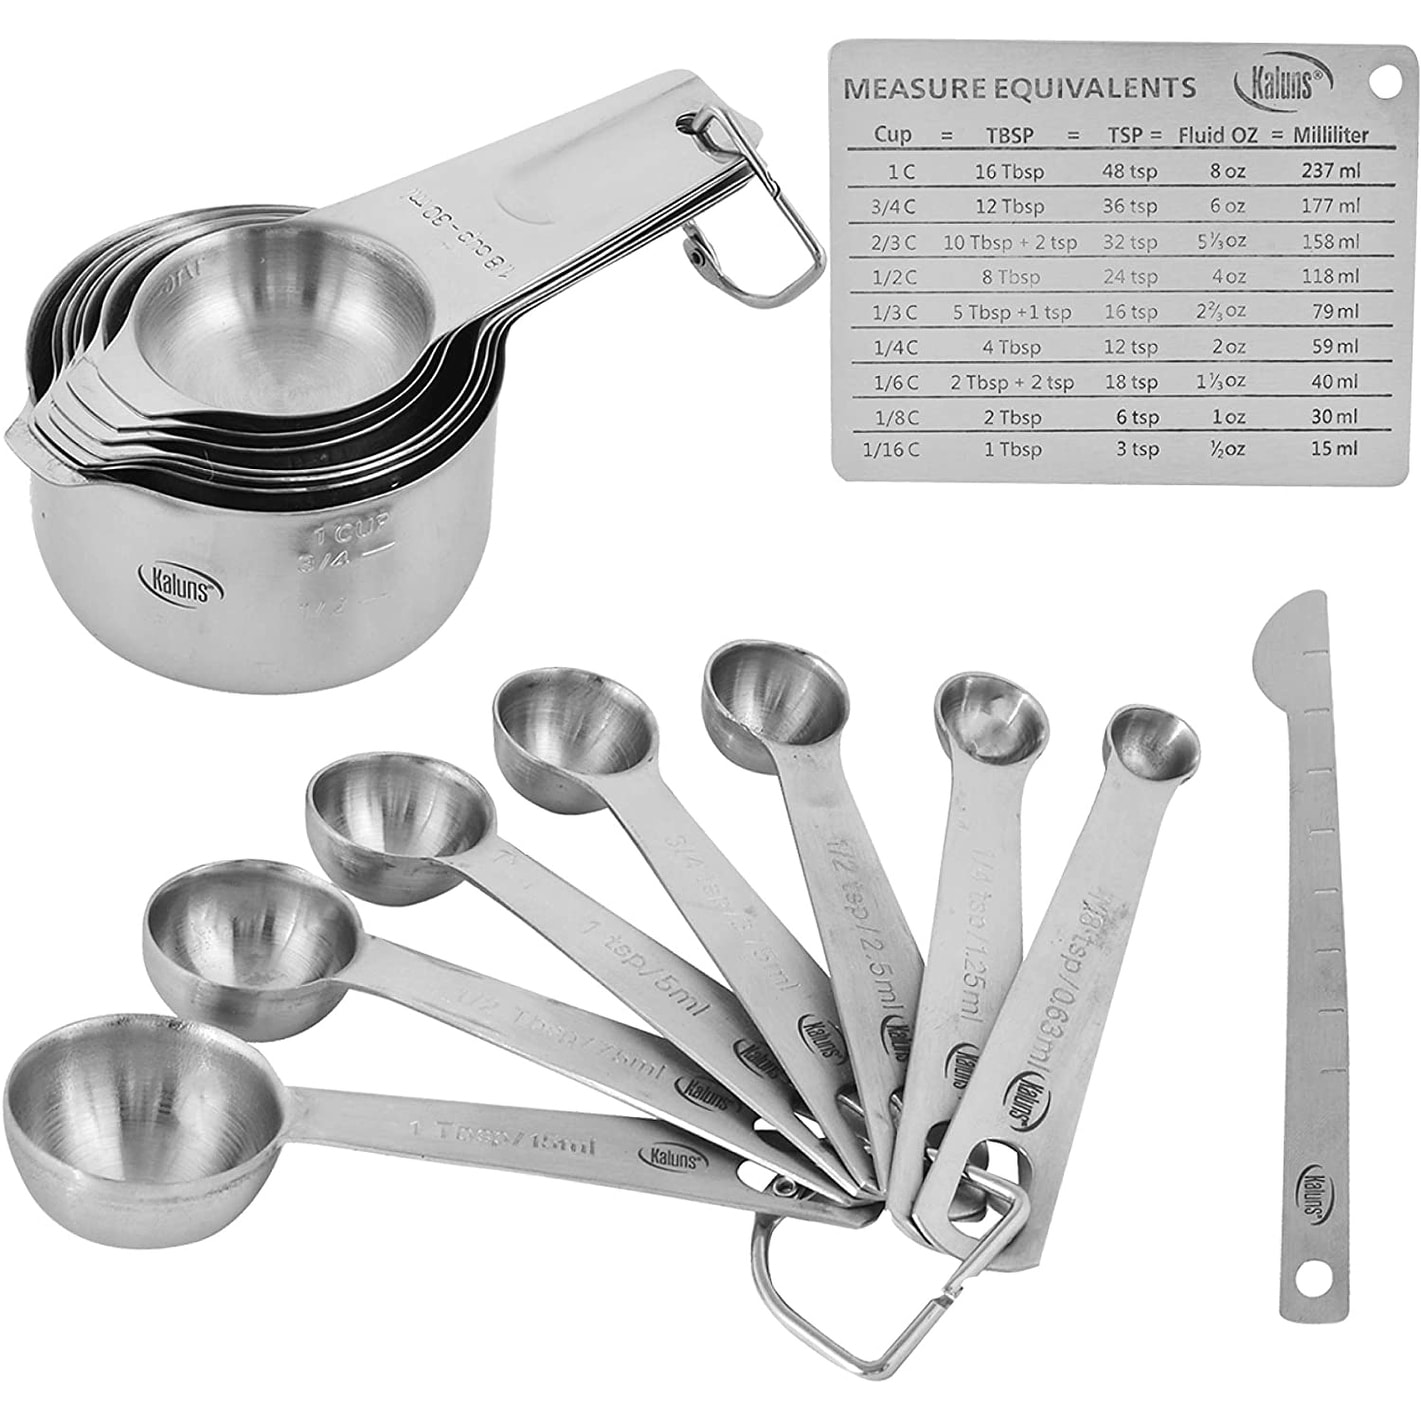 Measuring Cups and Spoons Set of 21 Piece in 18/8 Stainless Steel, Heavy Duty 8 Measuring Cups, 7 Measuring Spoons, 1 Leveler & 5 Mini Measuring